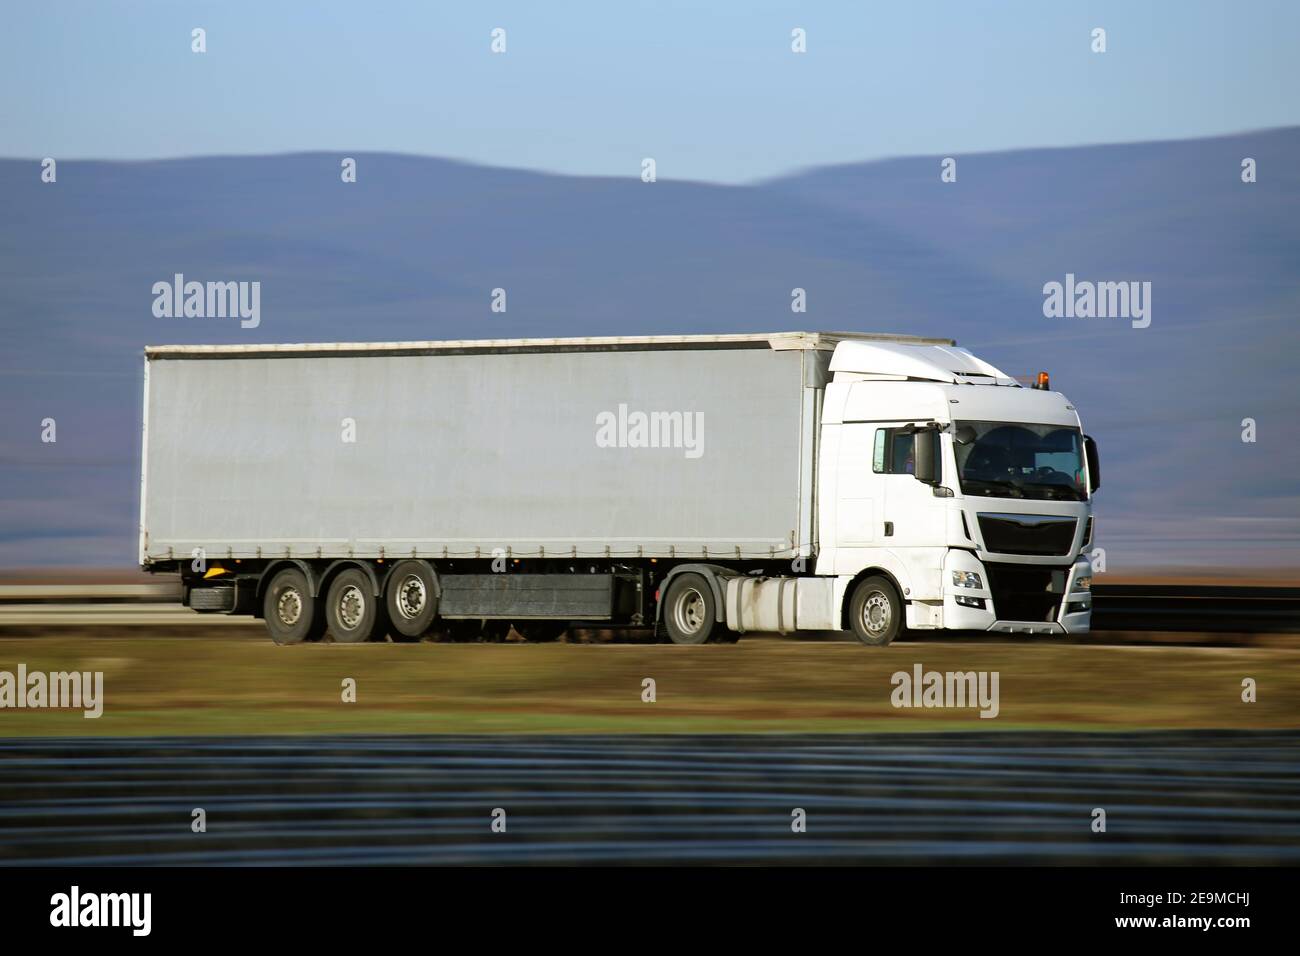 Symbol image: Truck on the highway Stock Photo